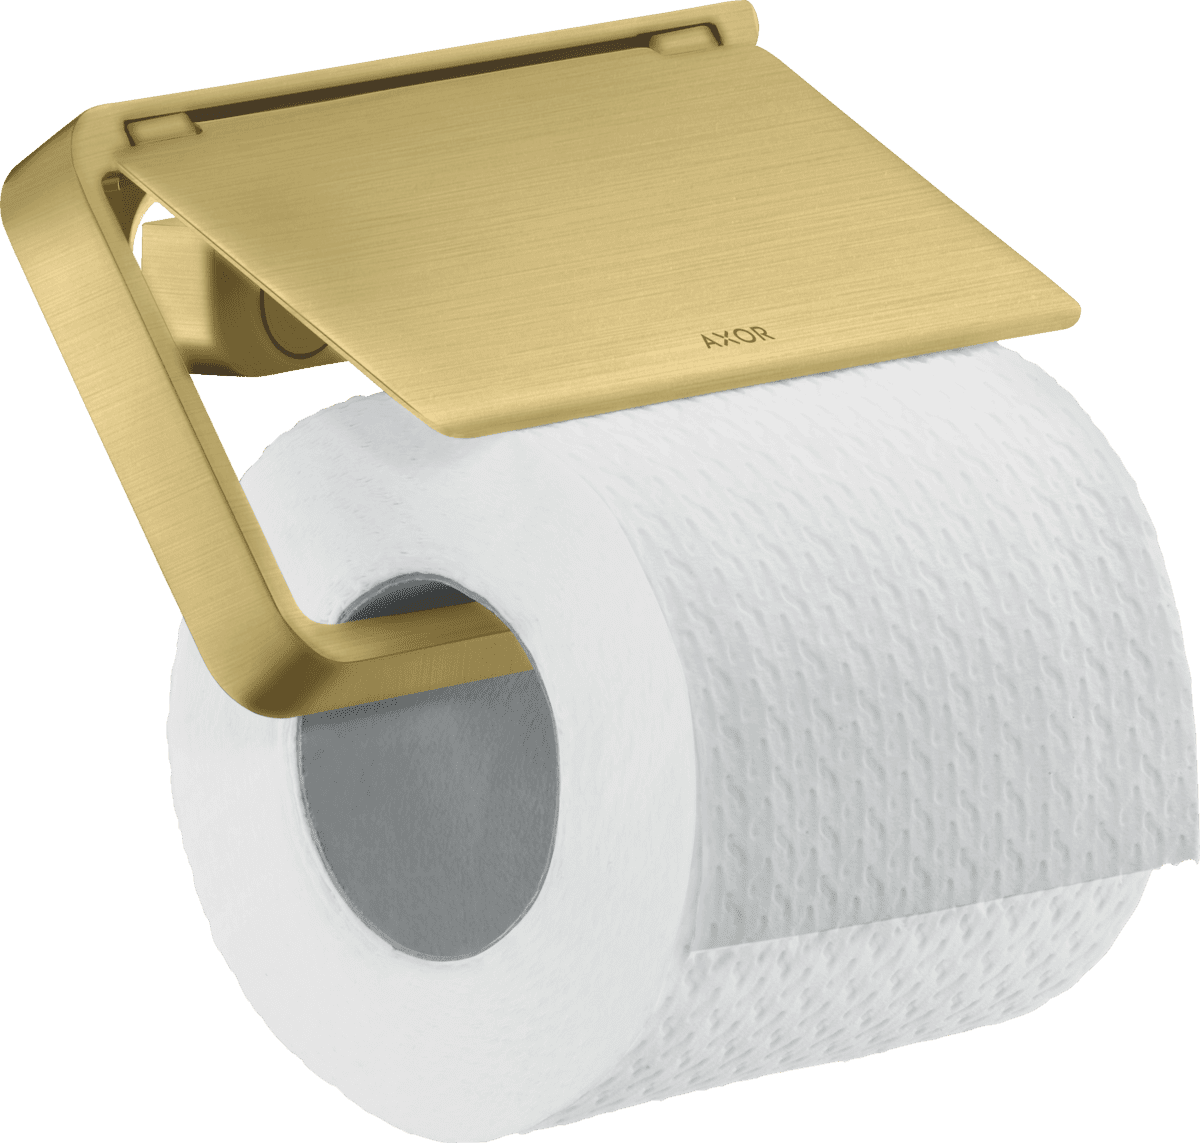 Picture of HANSGROHE AXOR Universal Softsquare Toilet paper holder with cover #42836950 - Brushed Brass